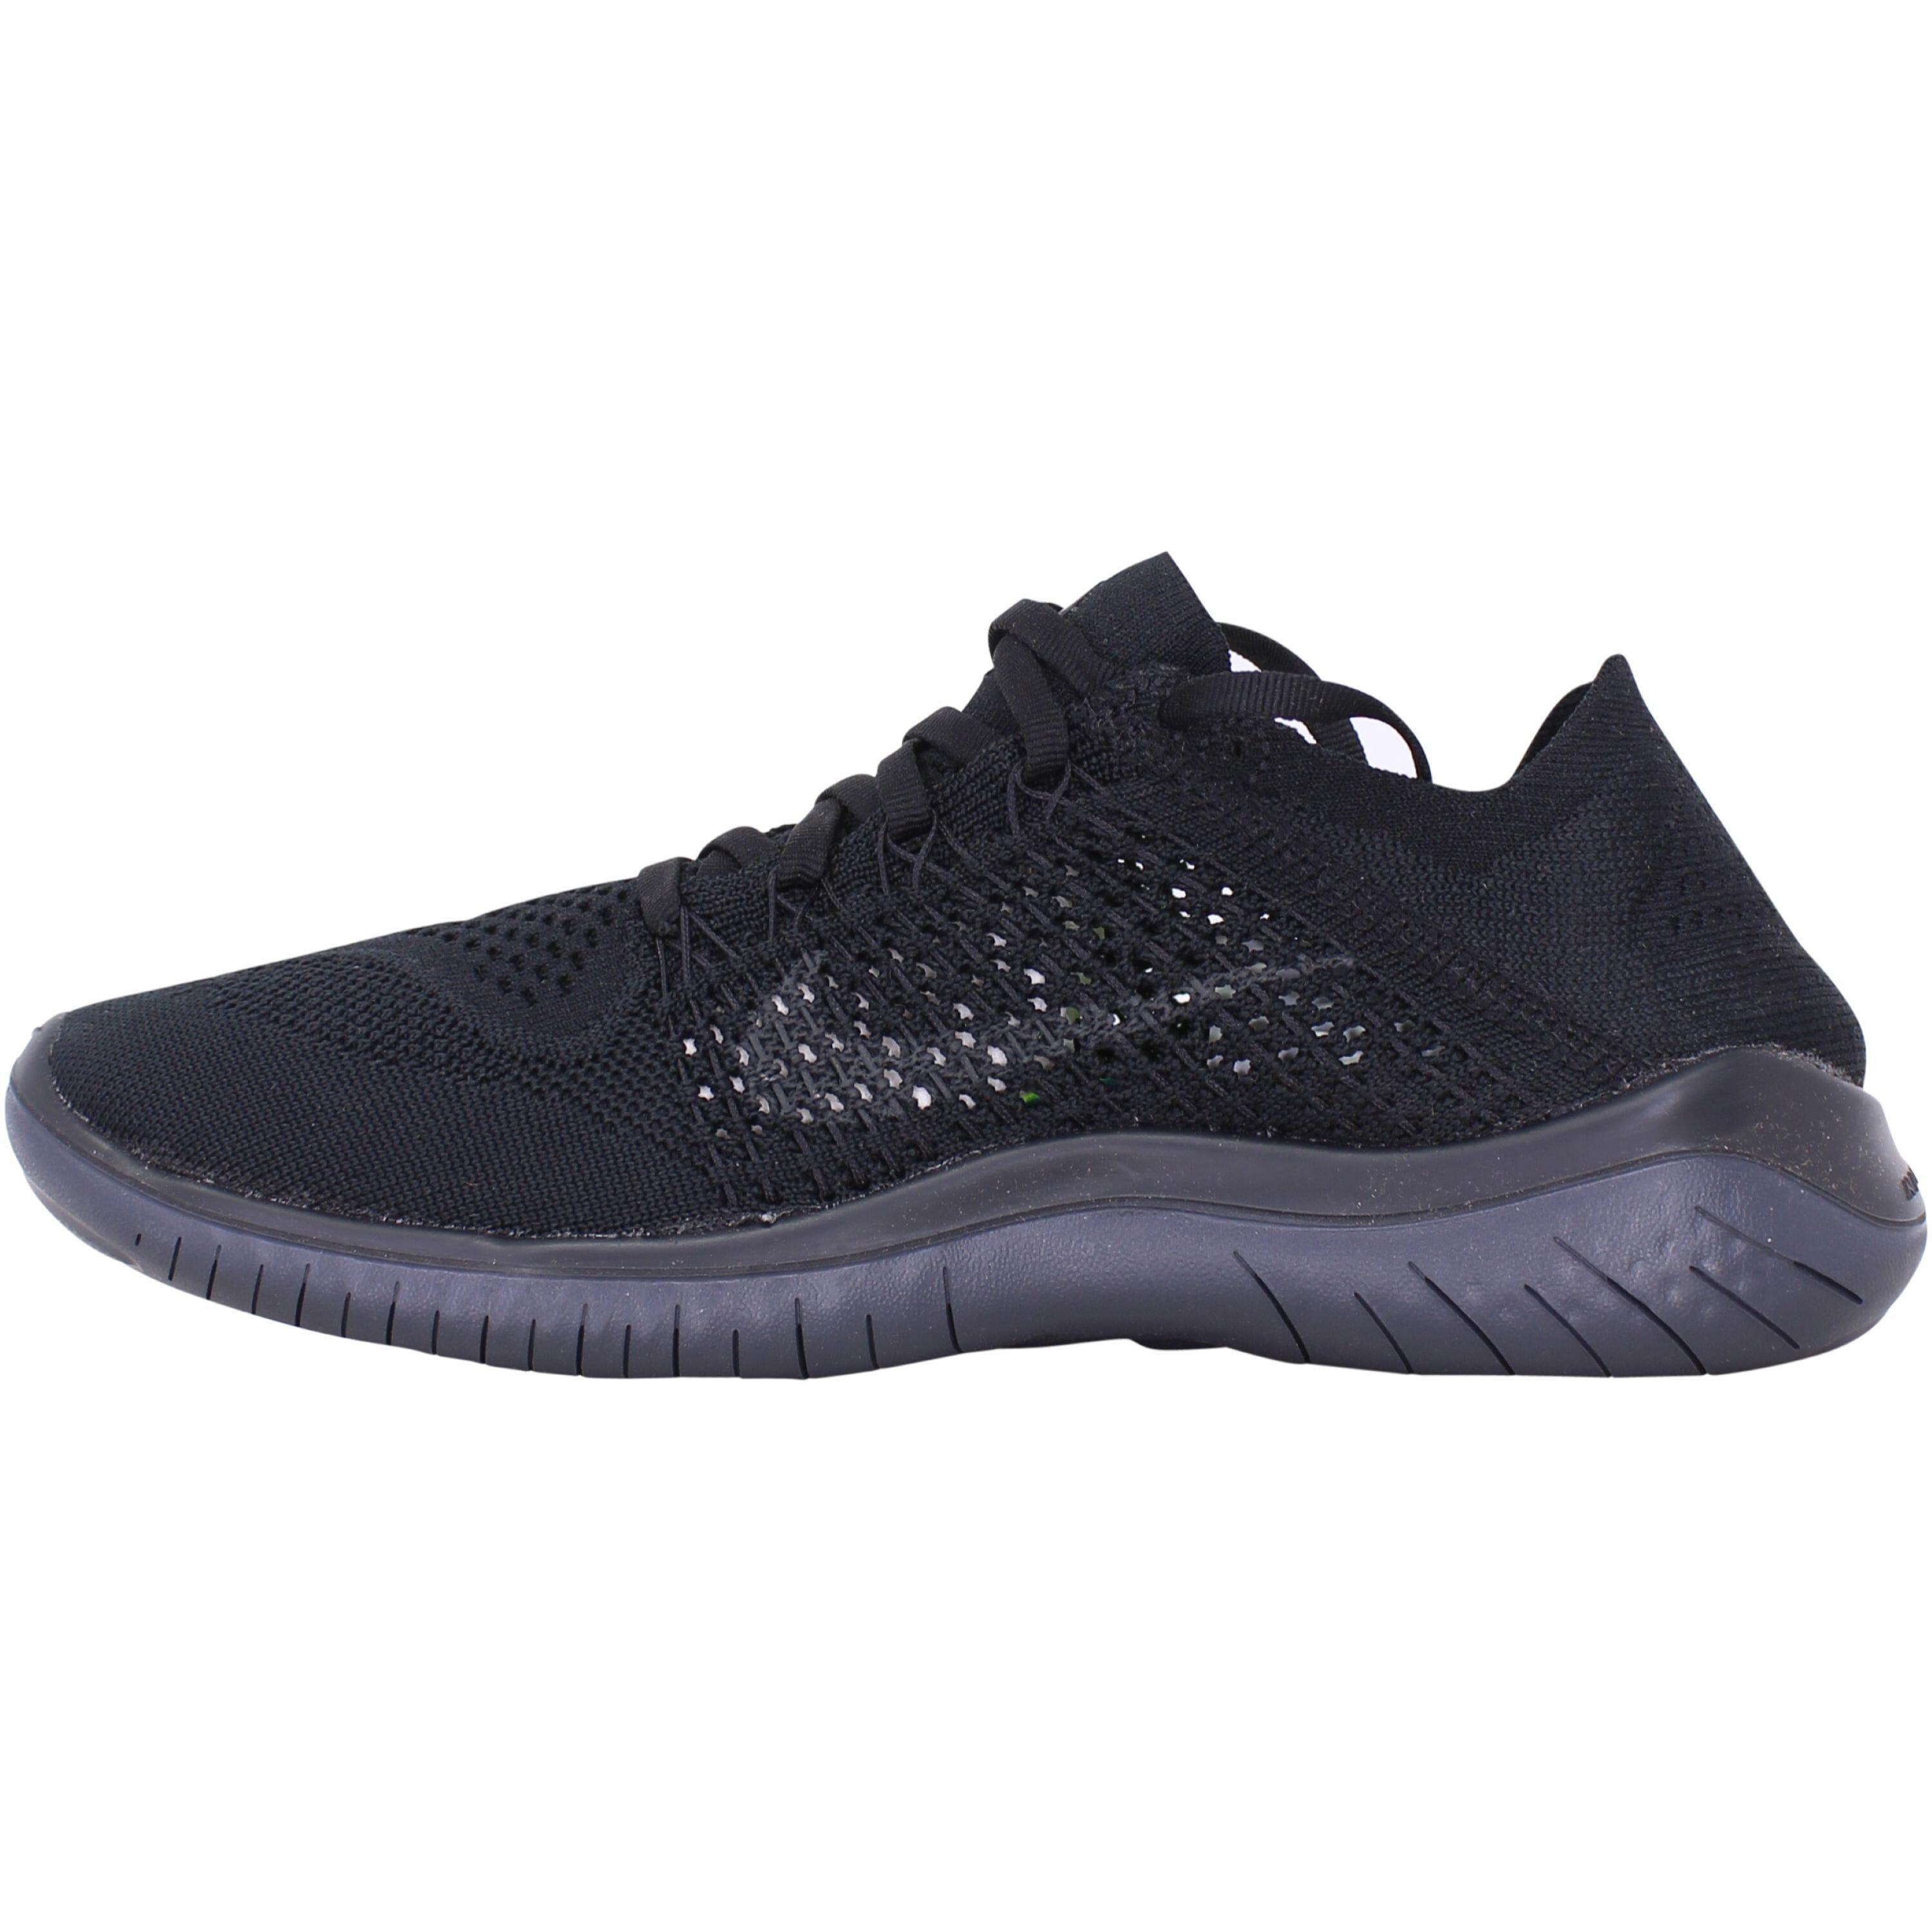 Nike Free Rn Flyknit 2018 /anthracite 942839-002 in Lyst